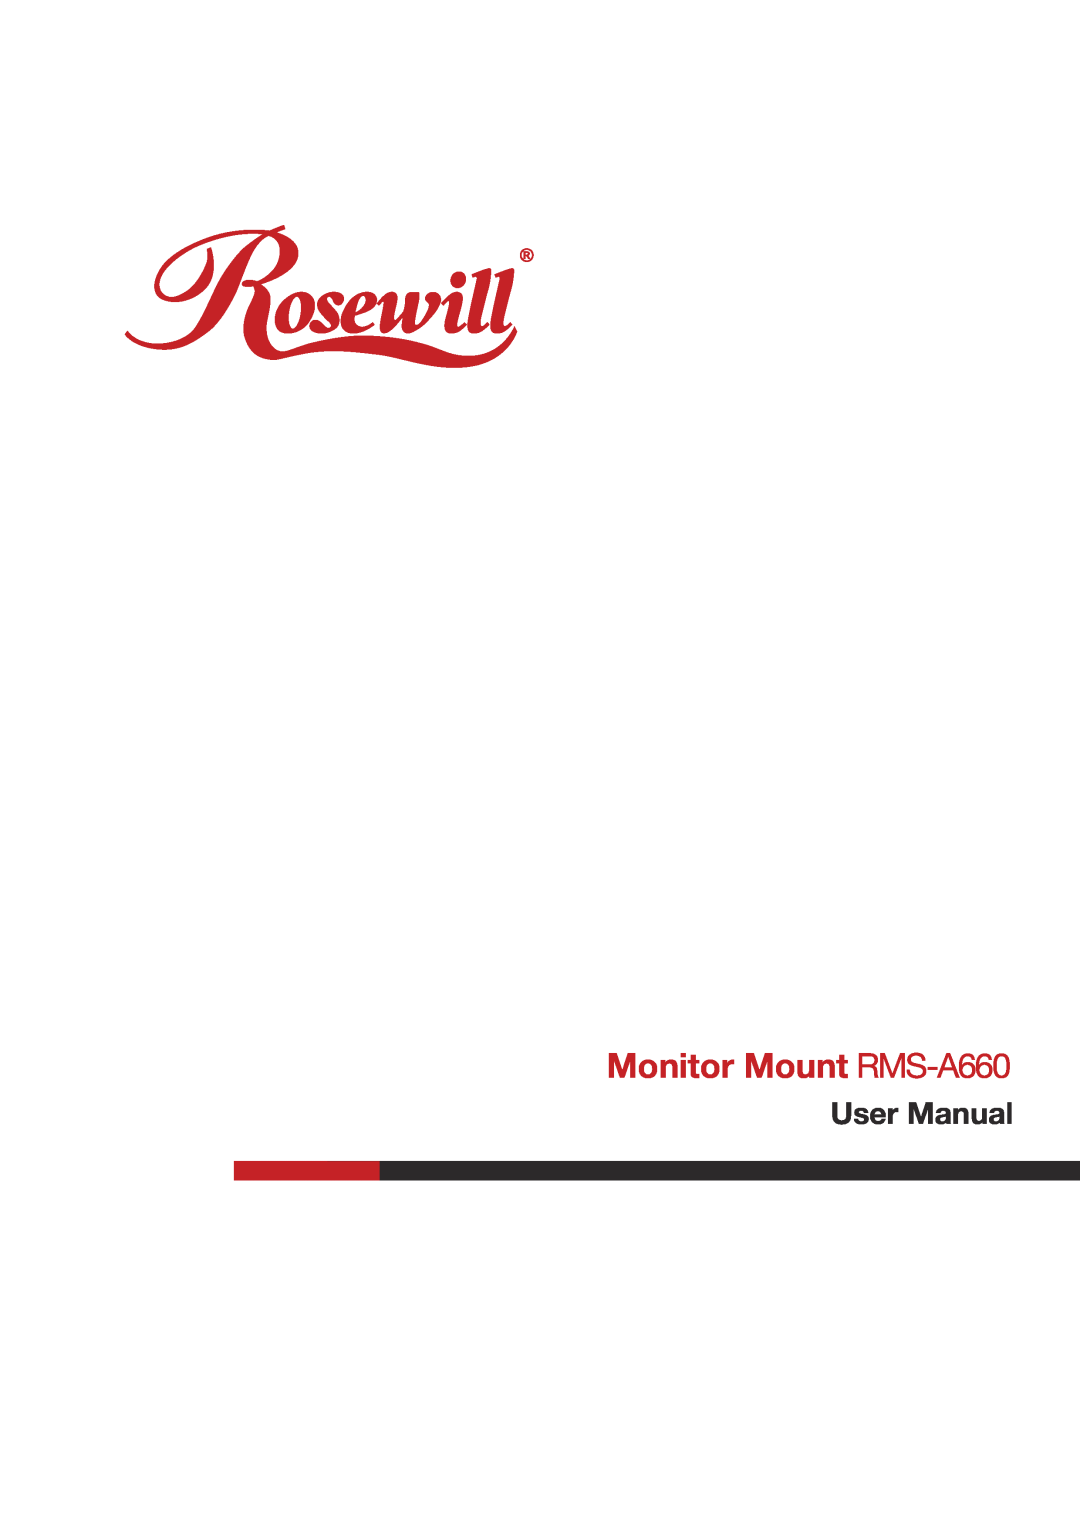 Rosewill user manual Monitor Mount RMS-A660 